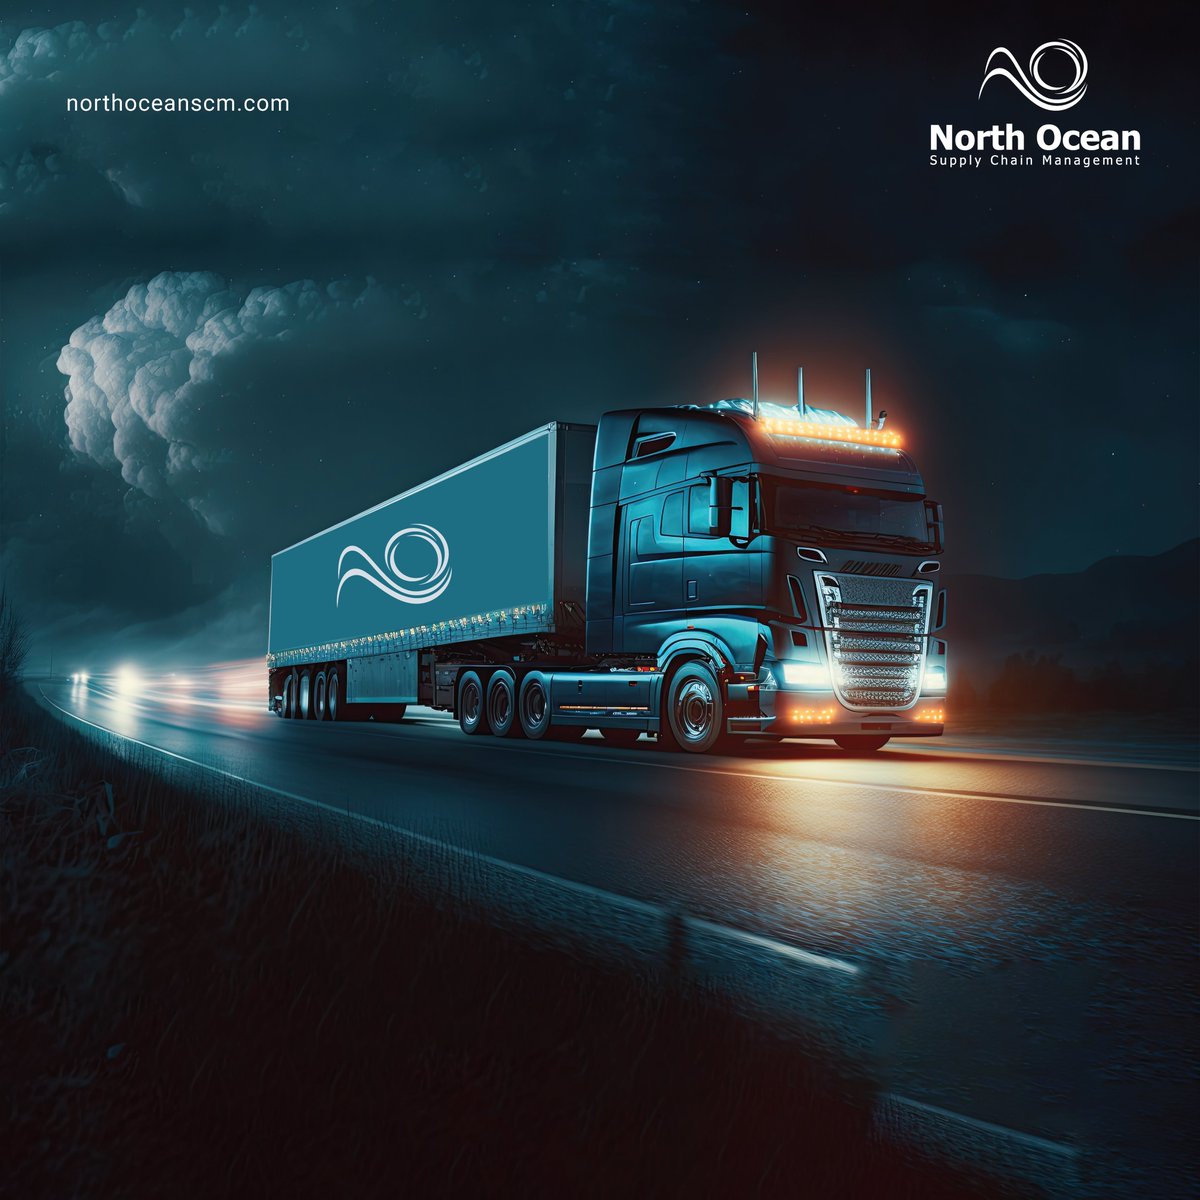 Revolutionizing cargo transportation with cutting-edge solutions for seamless delivery.
northoceanscm.com

#CargoDelivery
#TruckTransport
#FreightHauling
#DeliveryTruck
#LogisticsOnWheels
#TruckingLife
#FreightDelivery
#MovingGoods
#TruckersLife
#CargoMovers